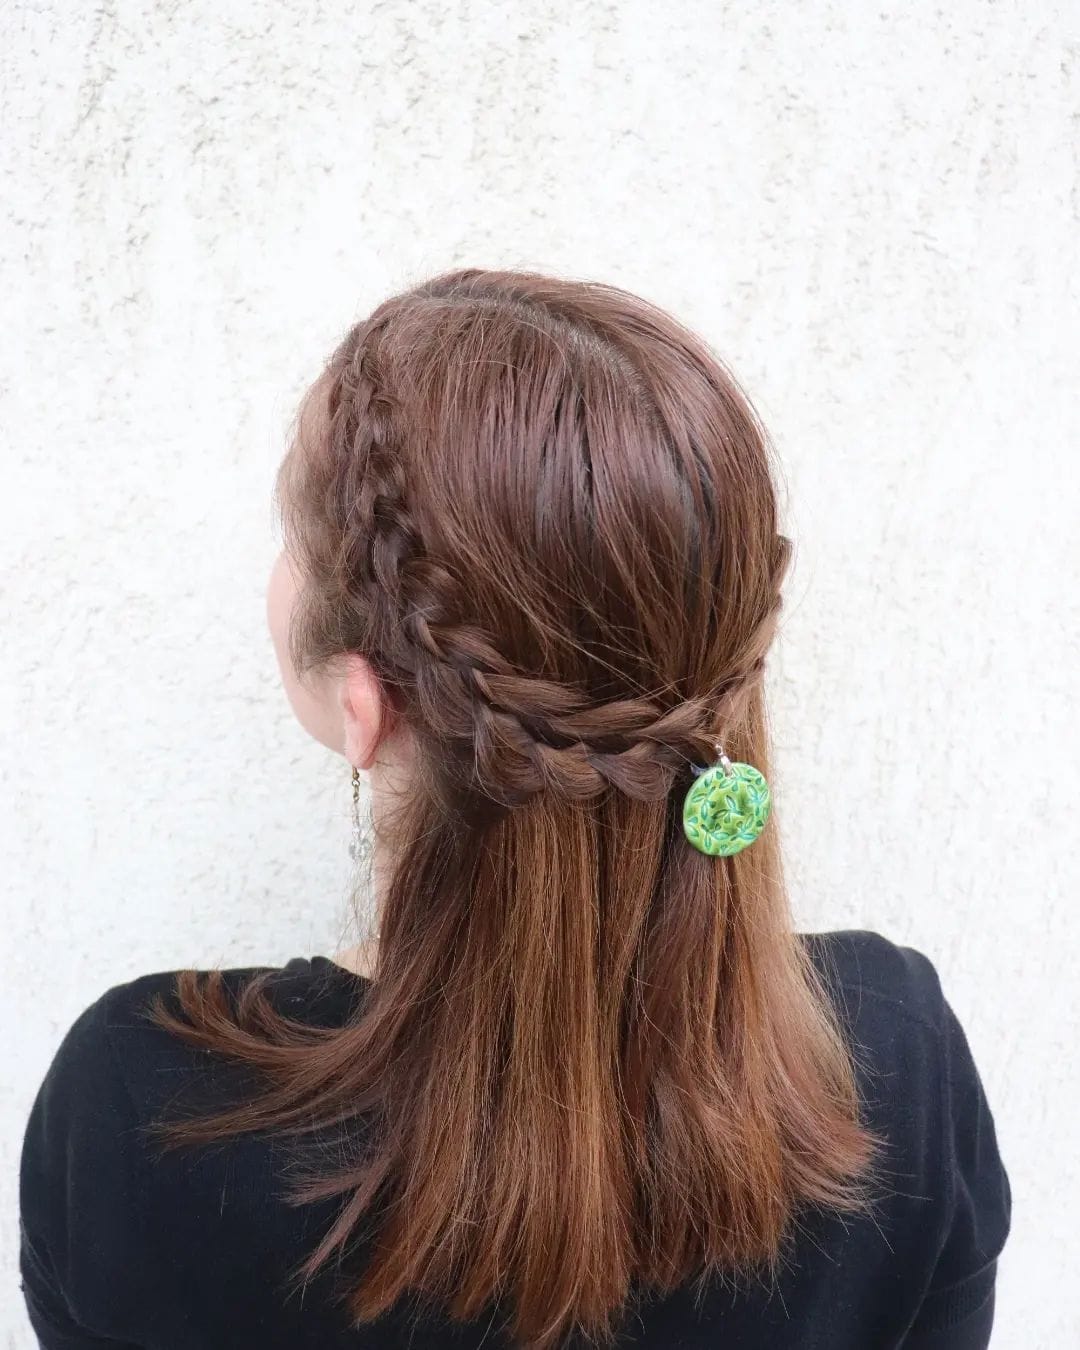 Simple chestnut brown hair styled with a playful half-up braid